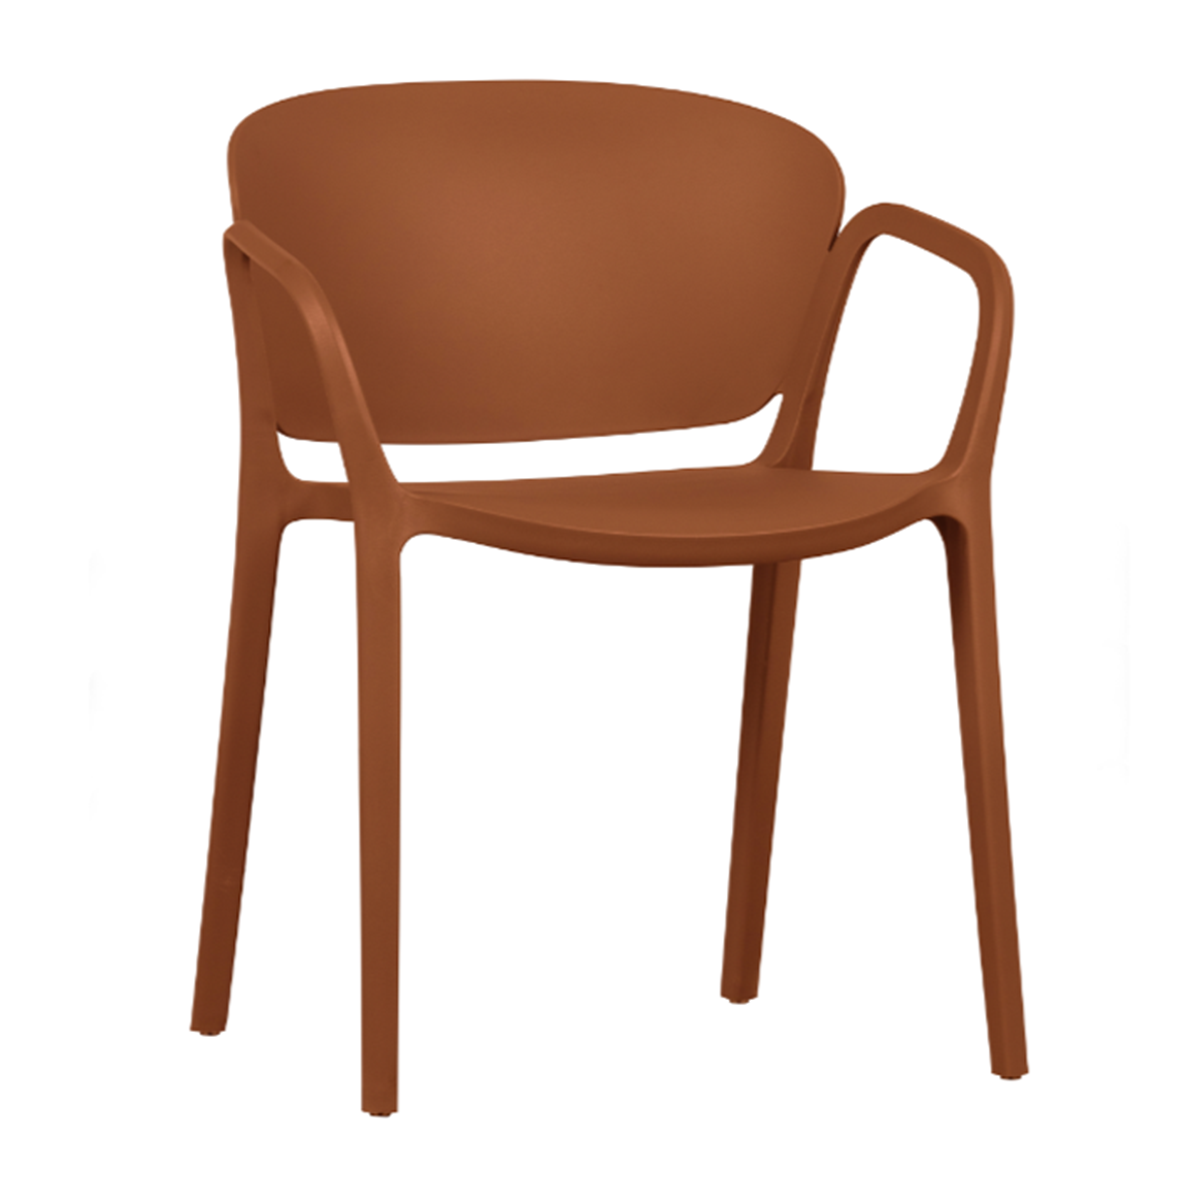 BENT OUTDOOR DINING CHAIR 